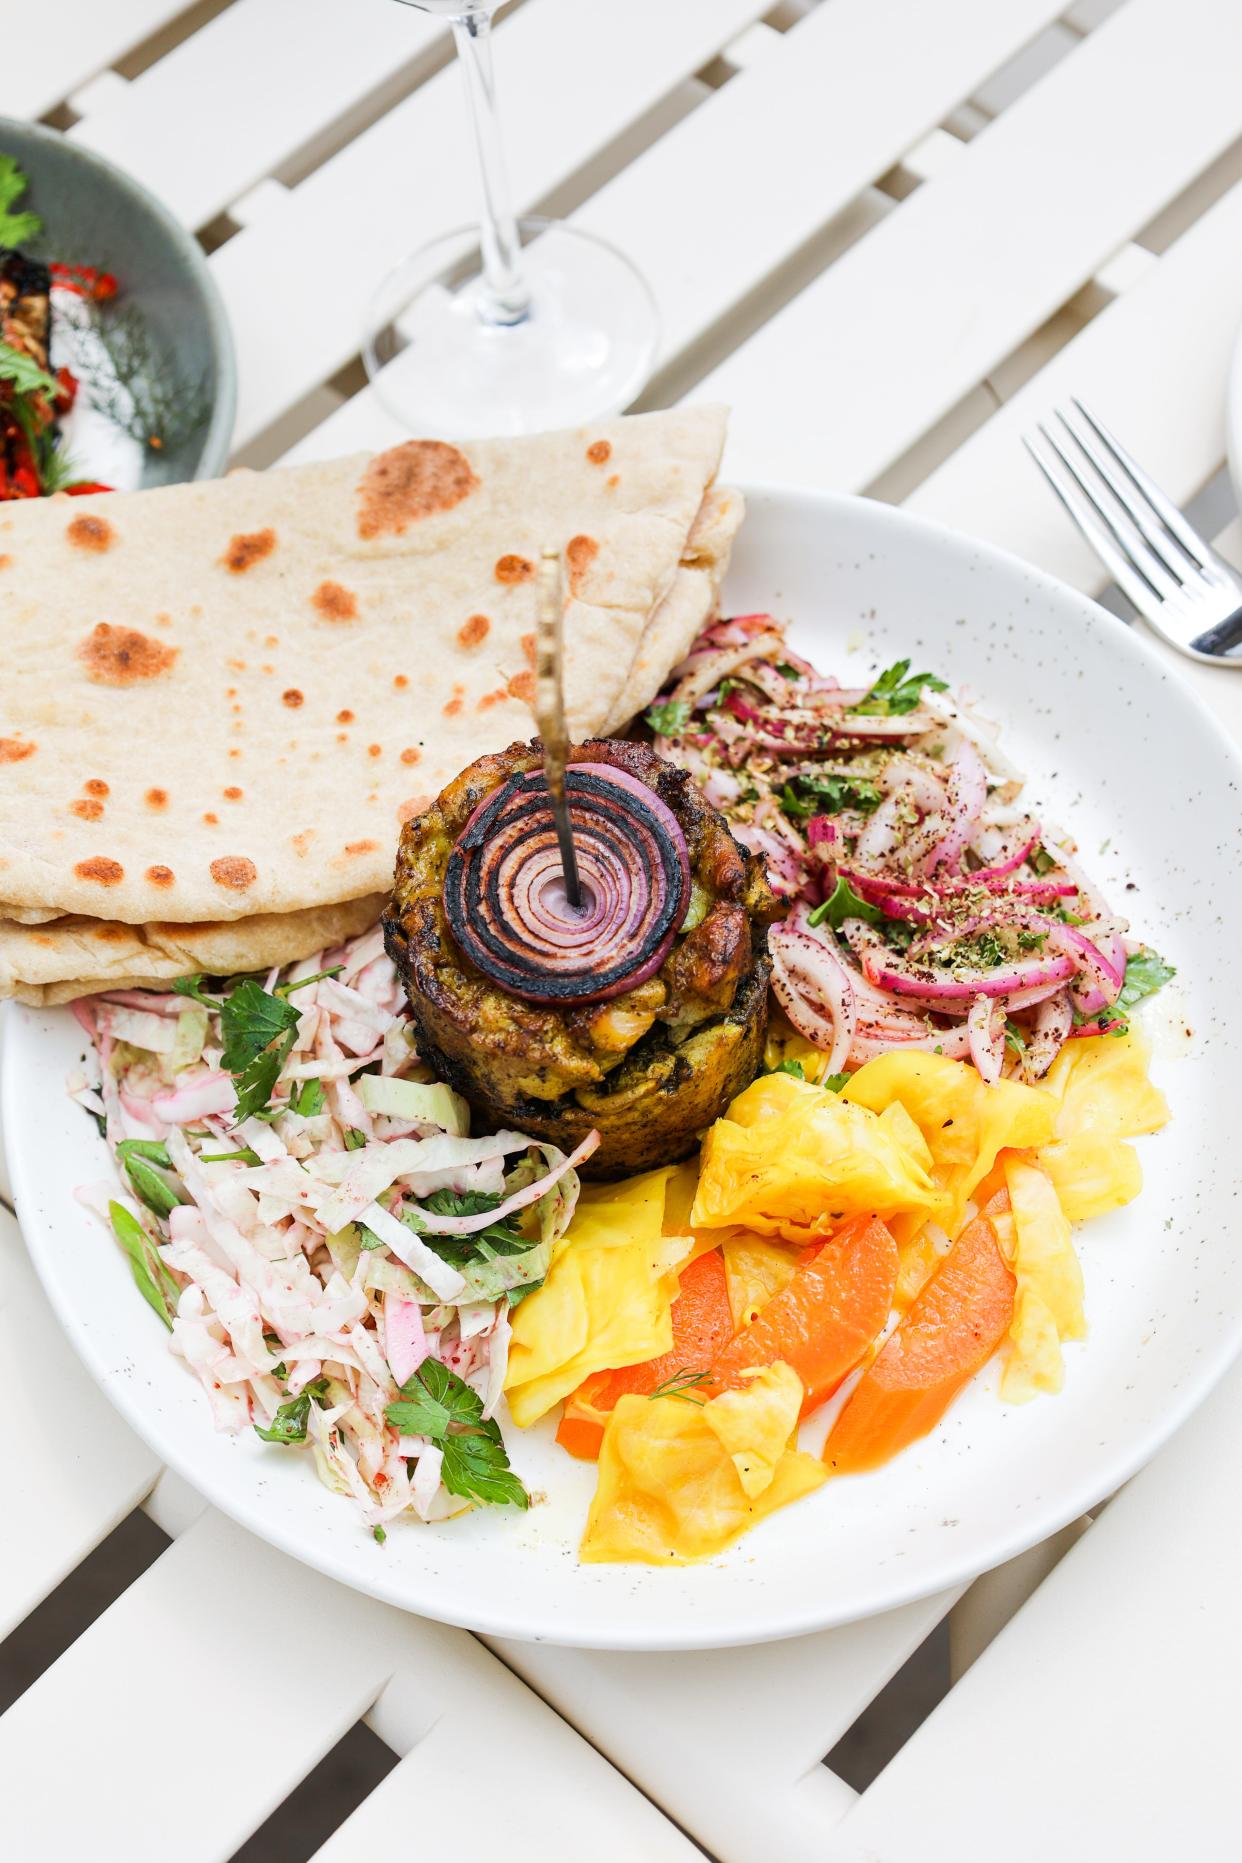 The chicken shawarma at Ezov comes with pickled vegetables that help cut the savoriness of the meat.